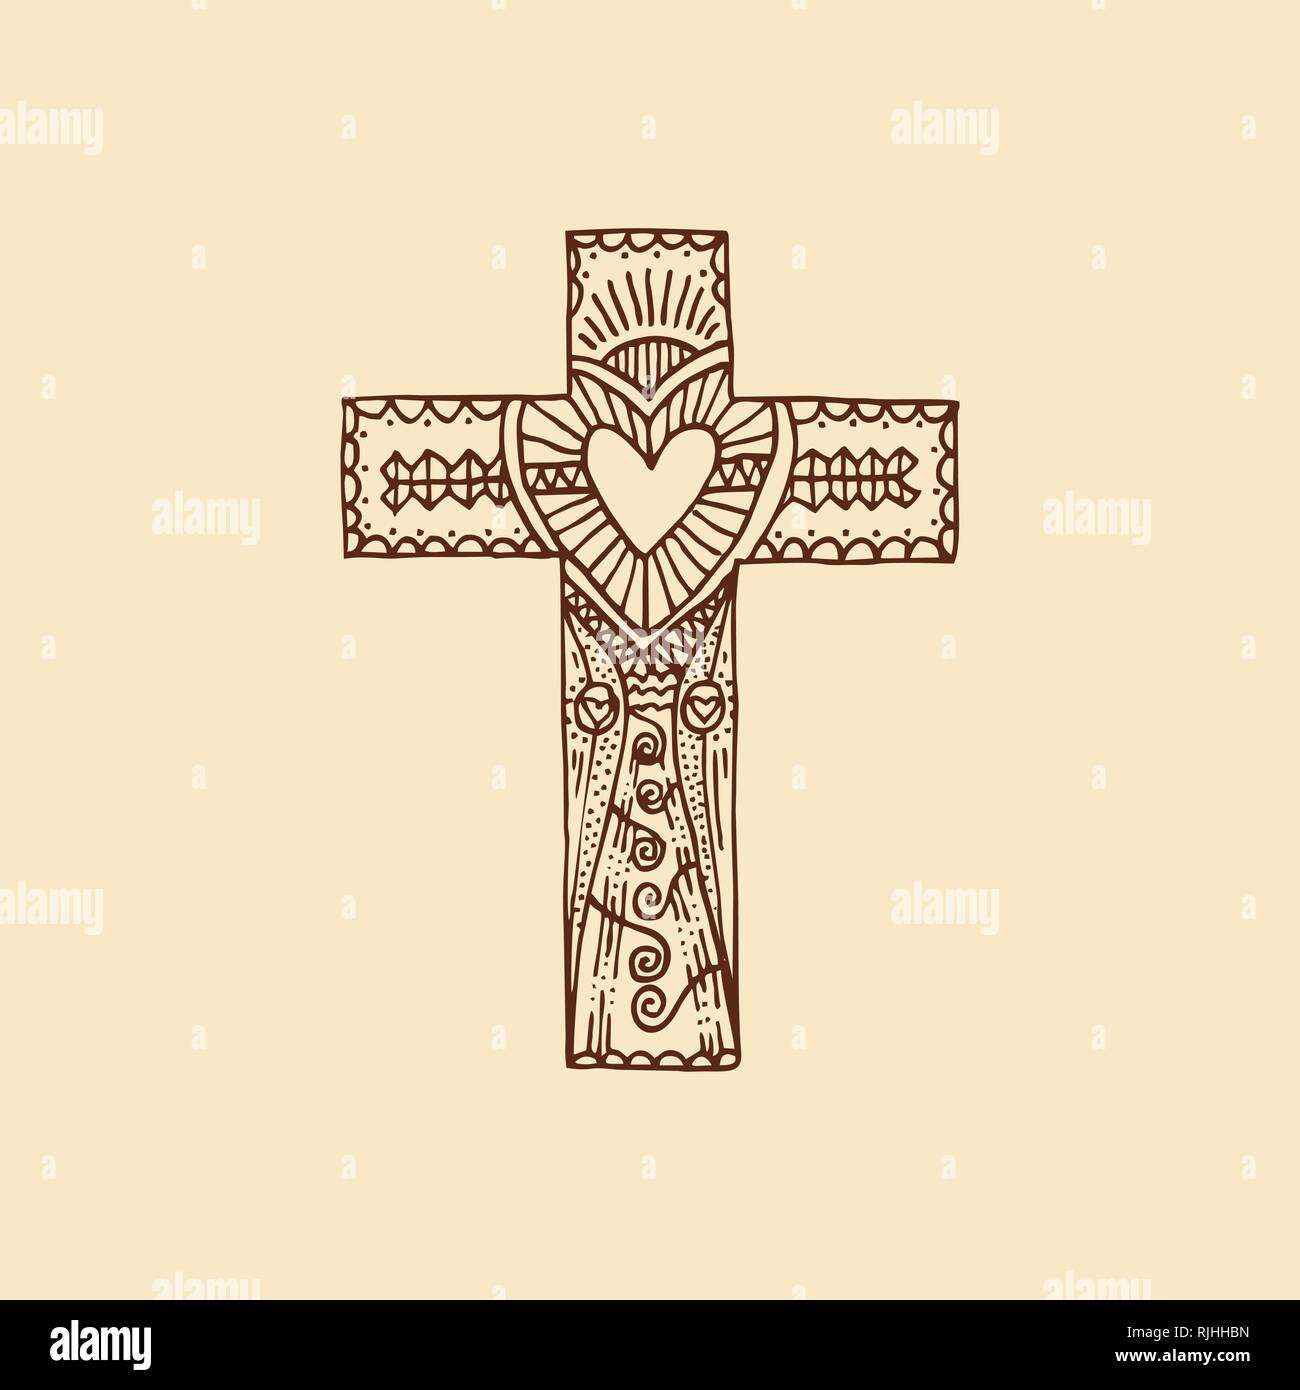 Cross of the Lord and Savior Jesus Christ hand-drawn. Doodle and design elements inside. Christian and biblical symbols. Stock Vector